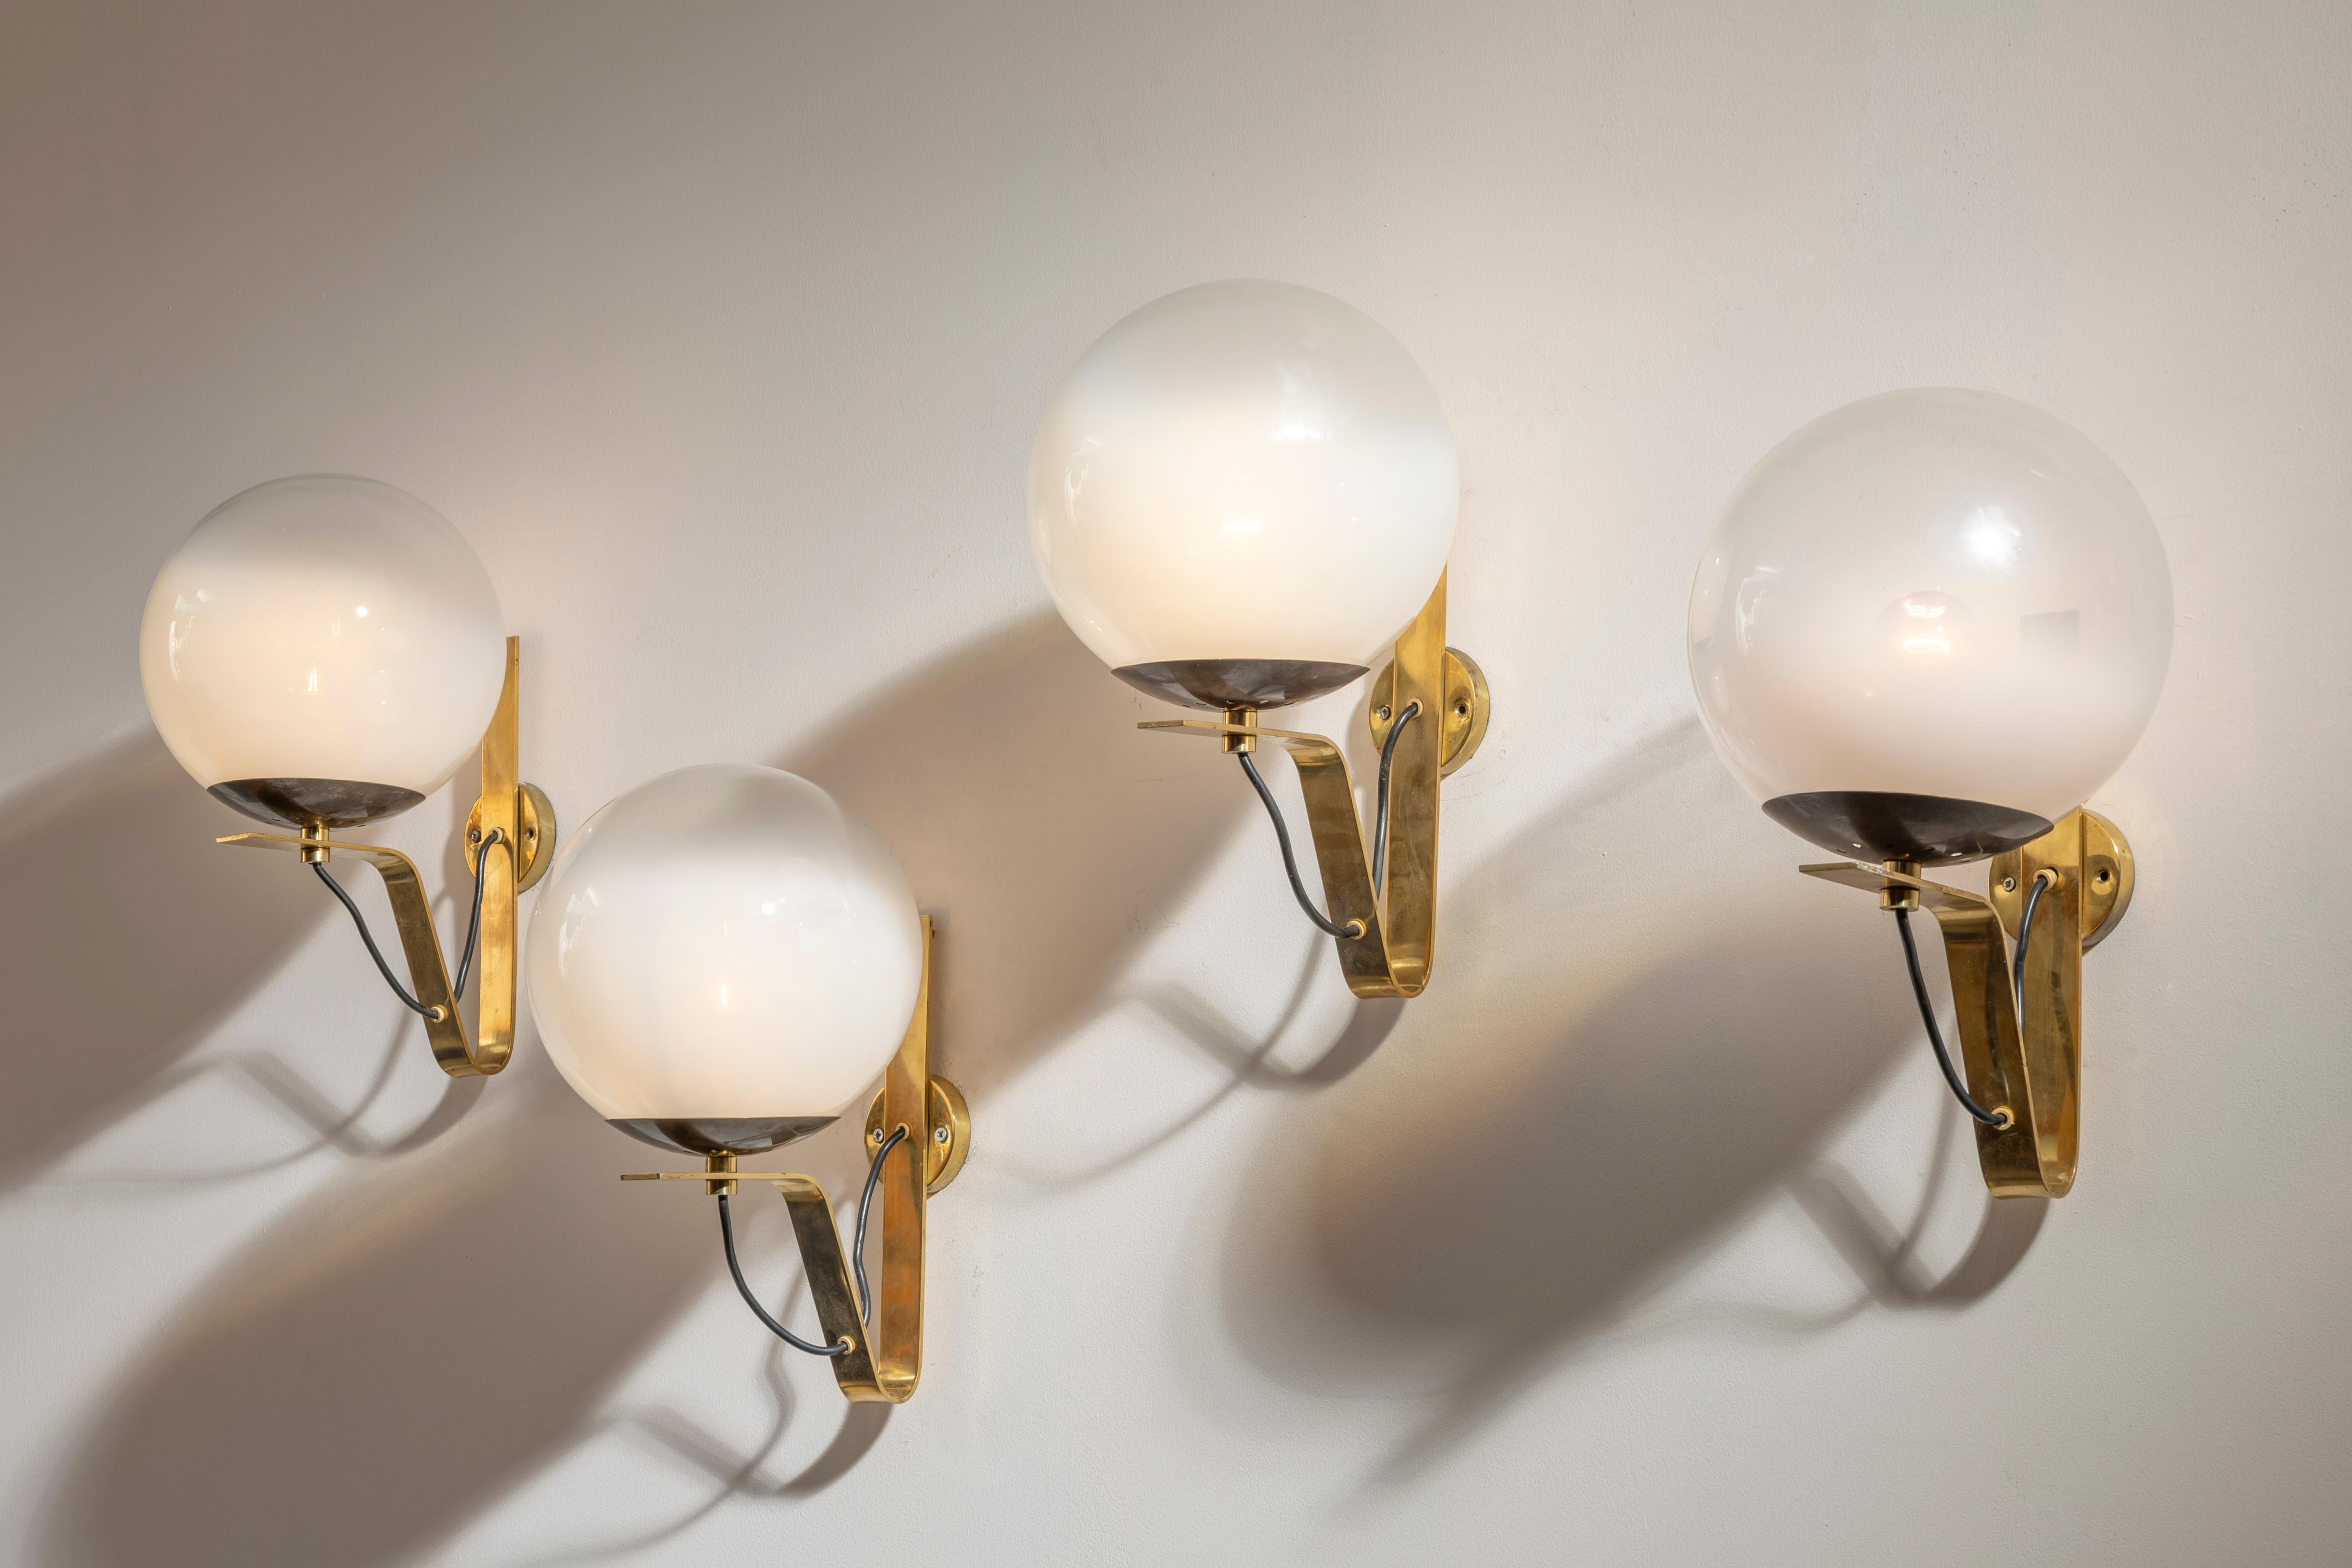 Group of four brass wall lamps, glass, designed by Sergio Asti, model b464, produced by Candle, Italy, 1960. Offered in two sets of two lamps each.

A delicate shaded glass sphere showcases the meticulous design of a series of wall lamps designed by